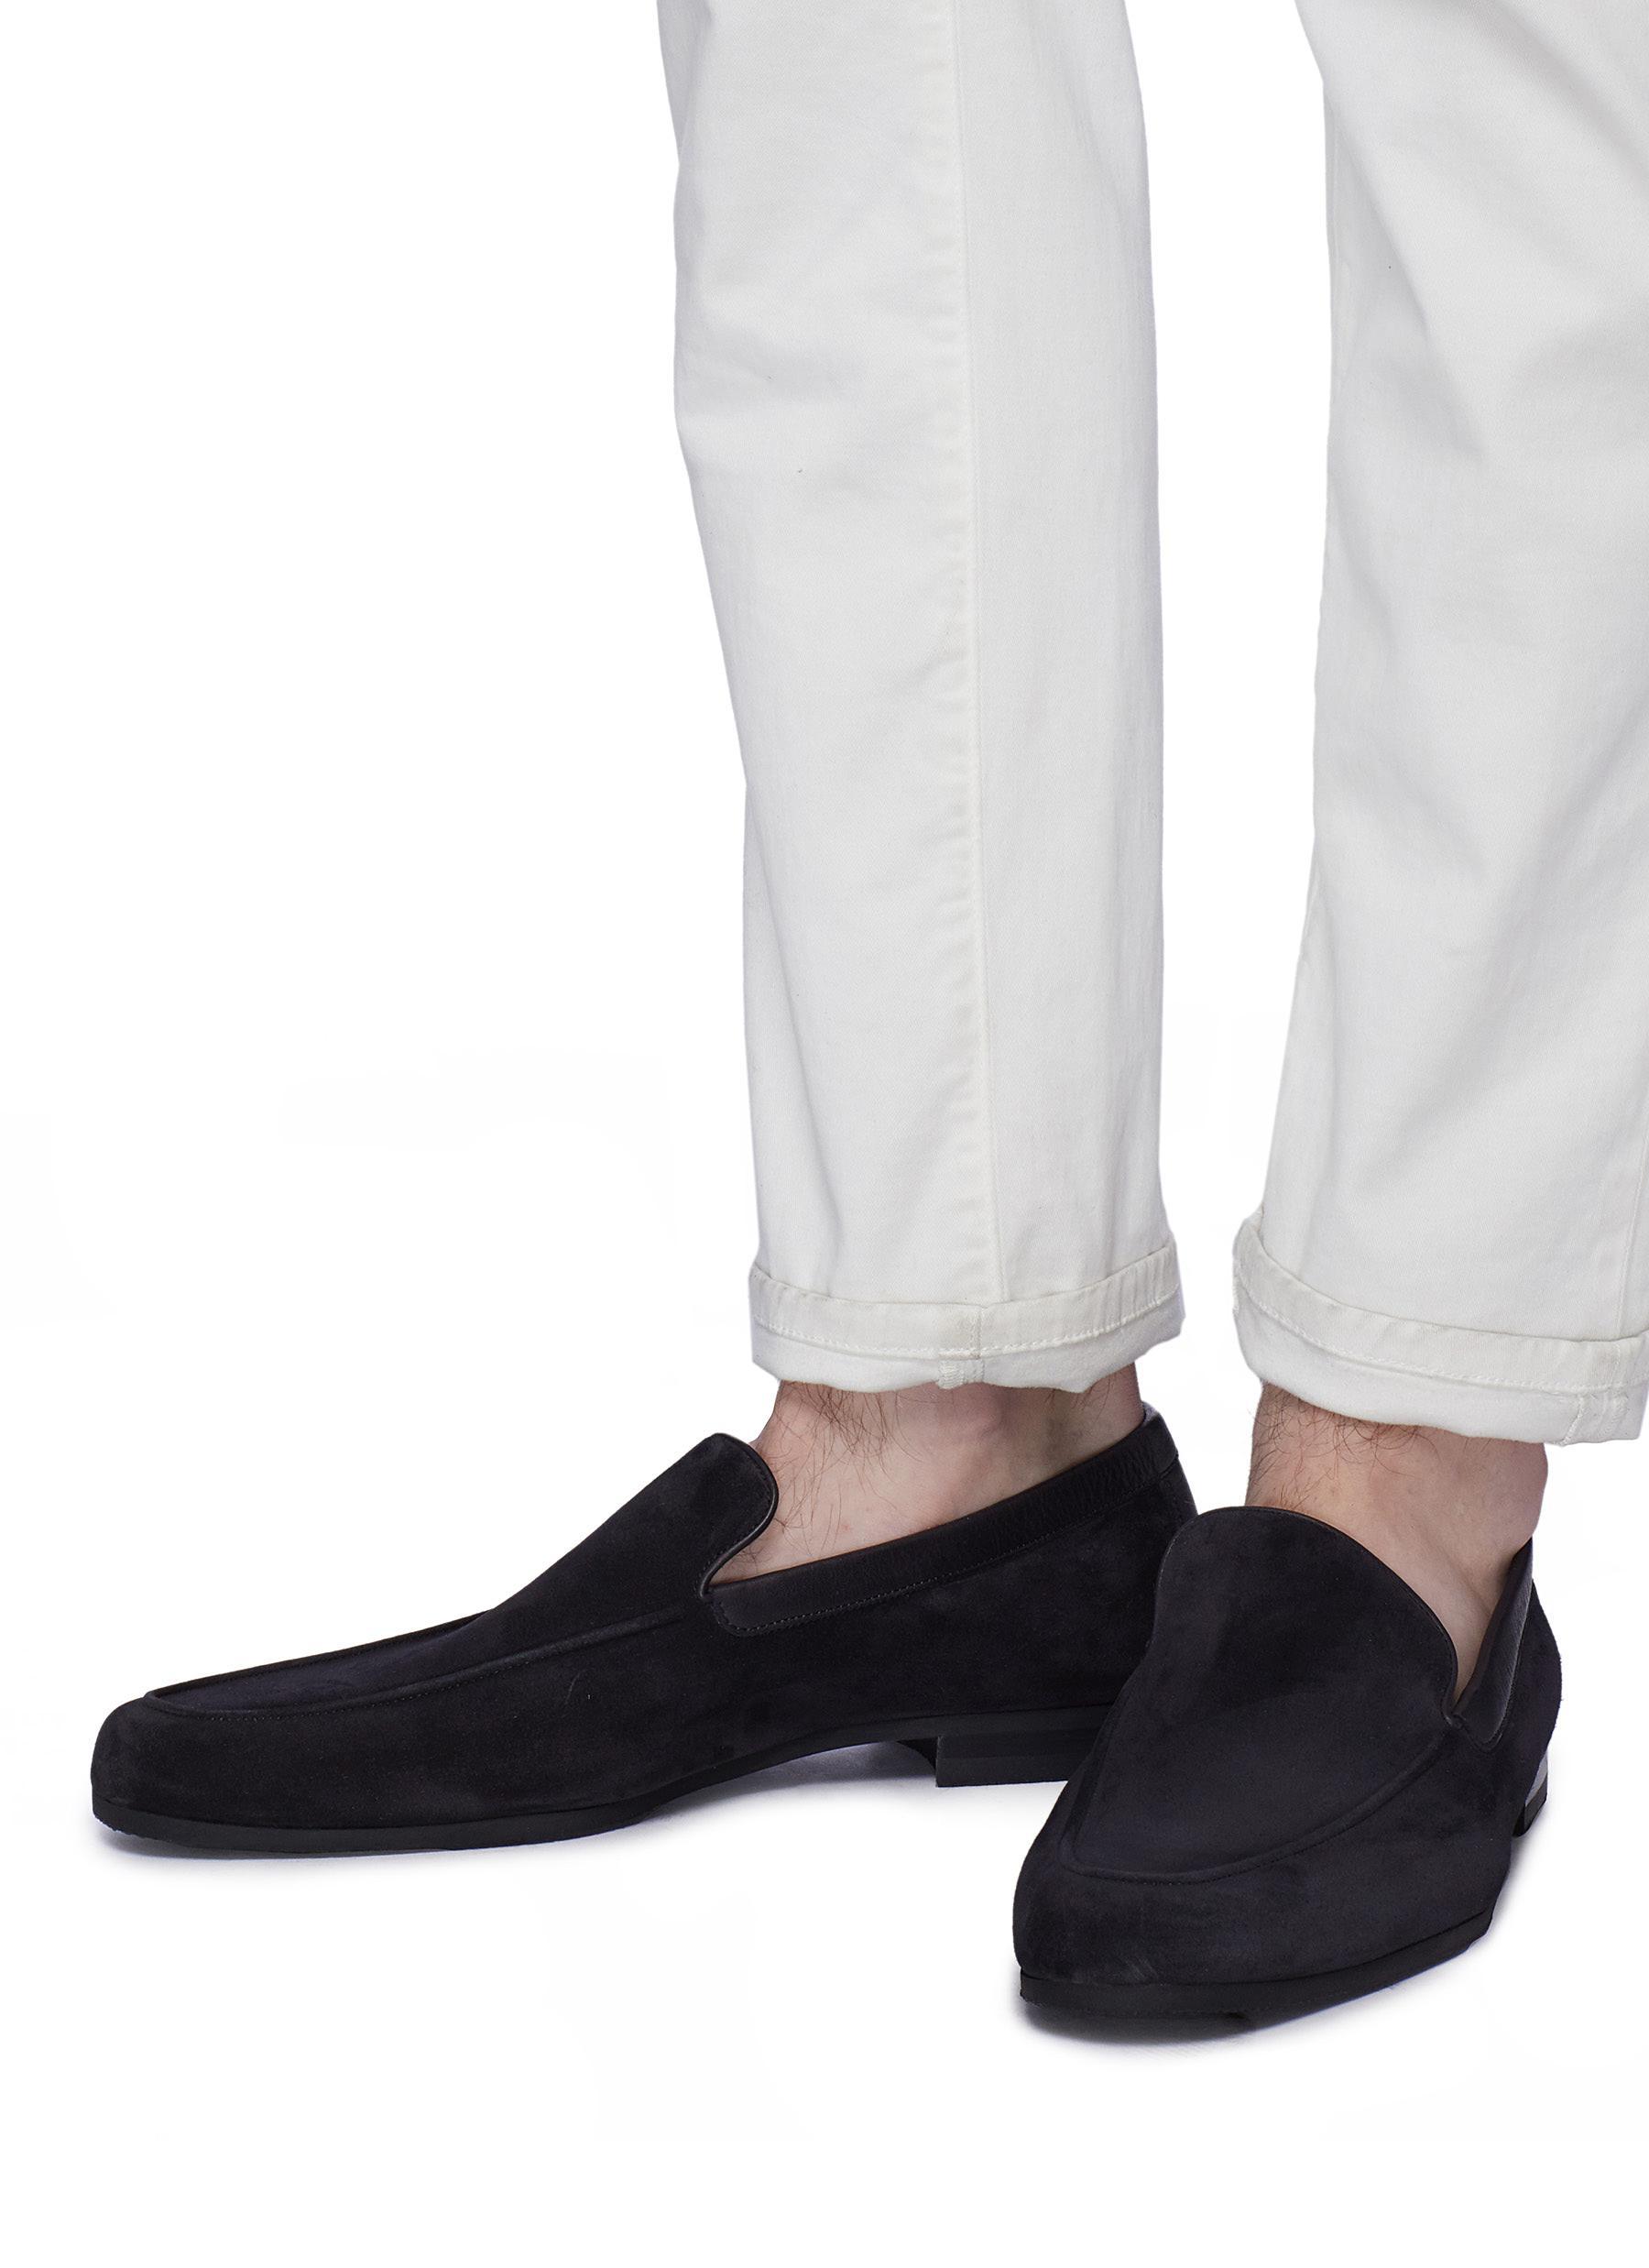 John Lobb 'tyne' Suede Loafers in Black for Men - Save 3% - Lyst